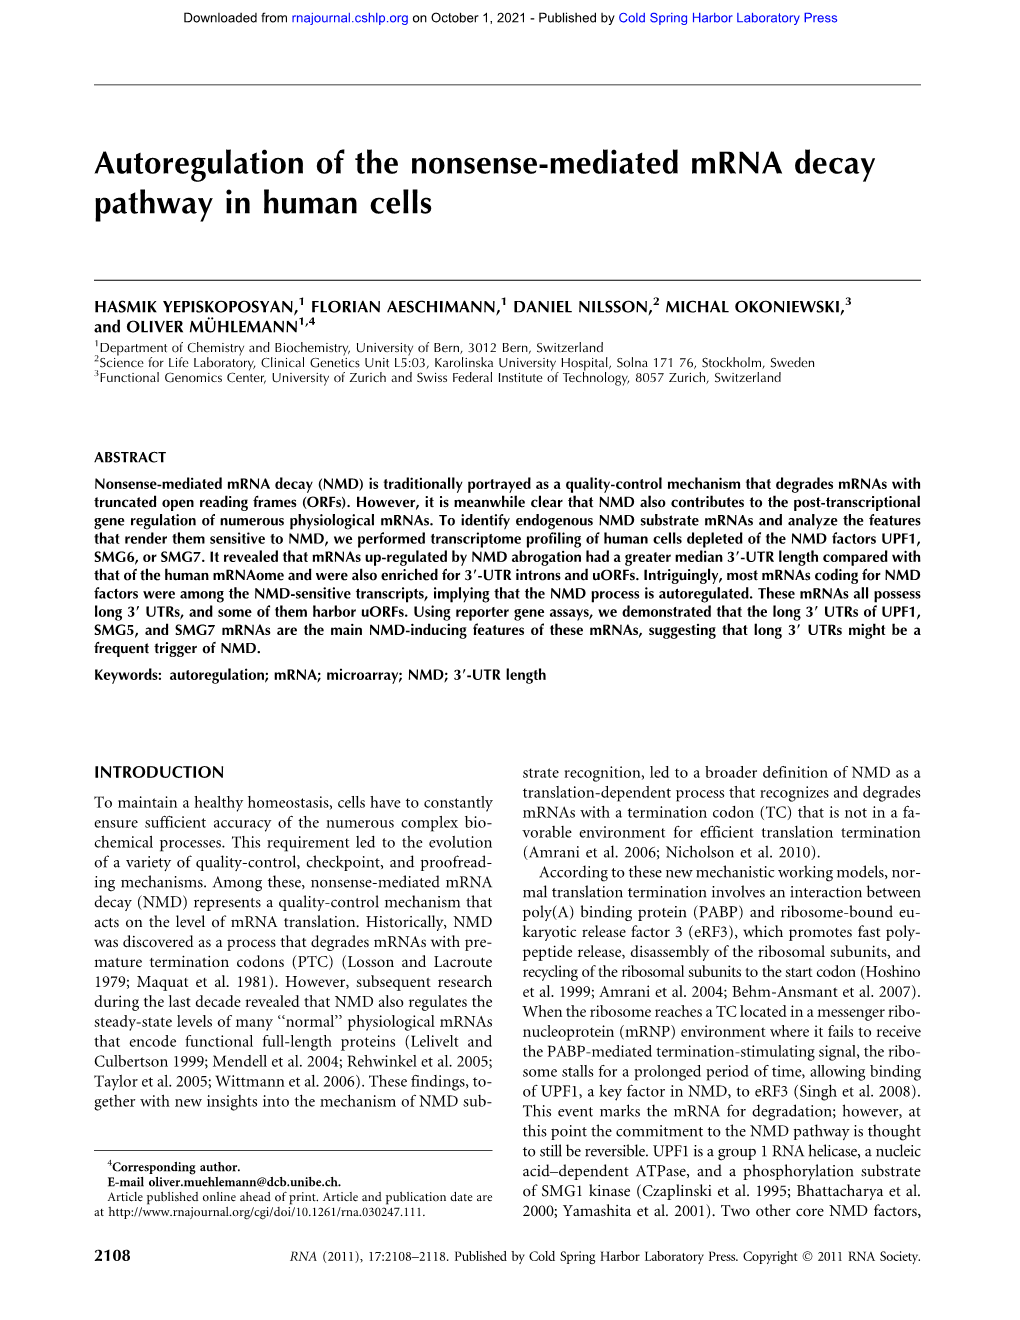 Autoregulation of the Nonsense-Mediated Mrna Decay Pathway in Human Cells